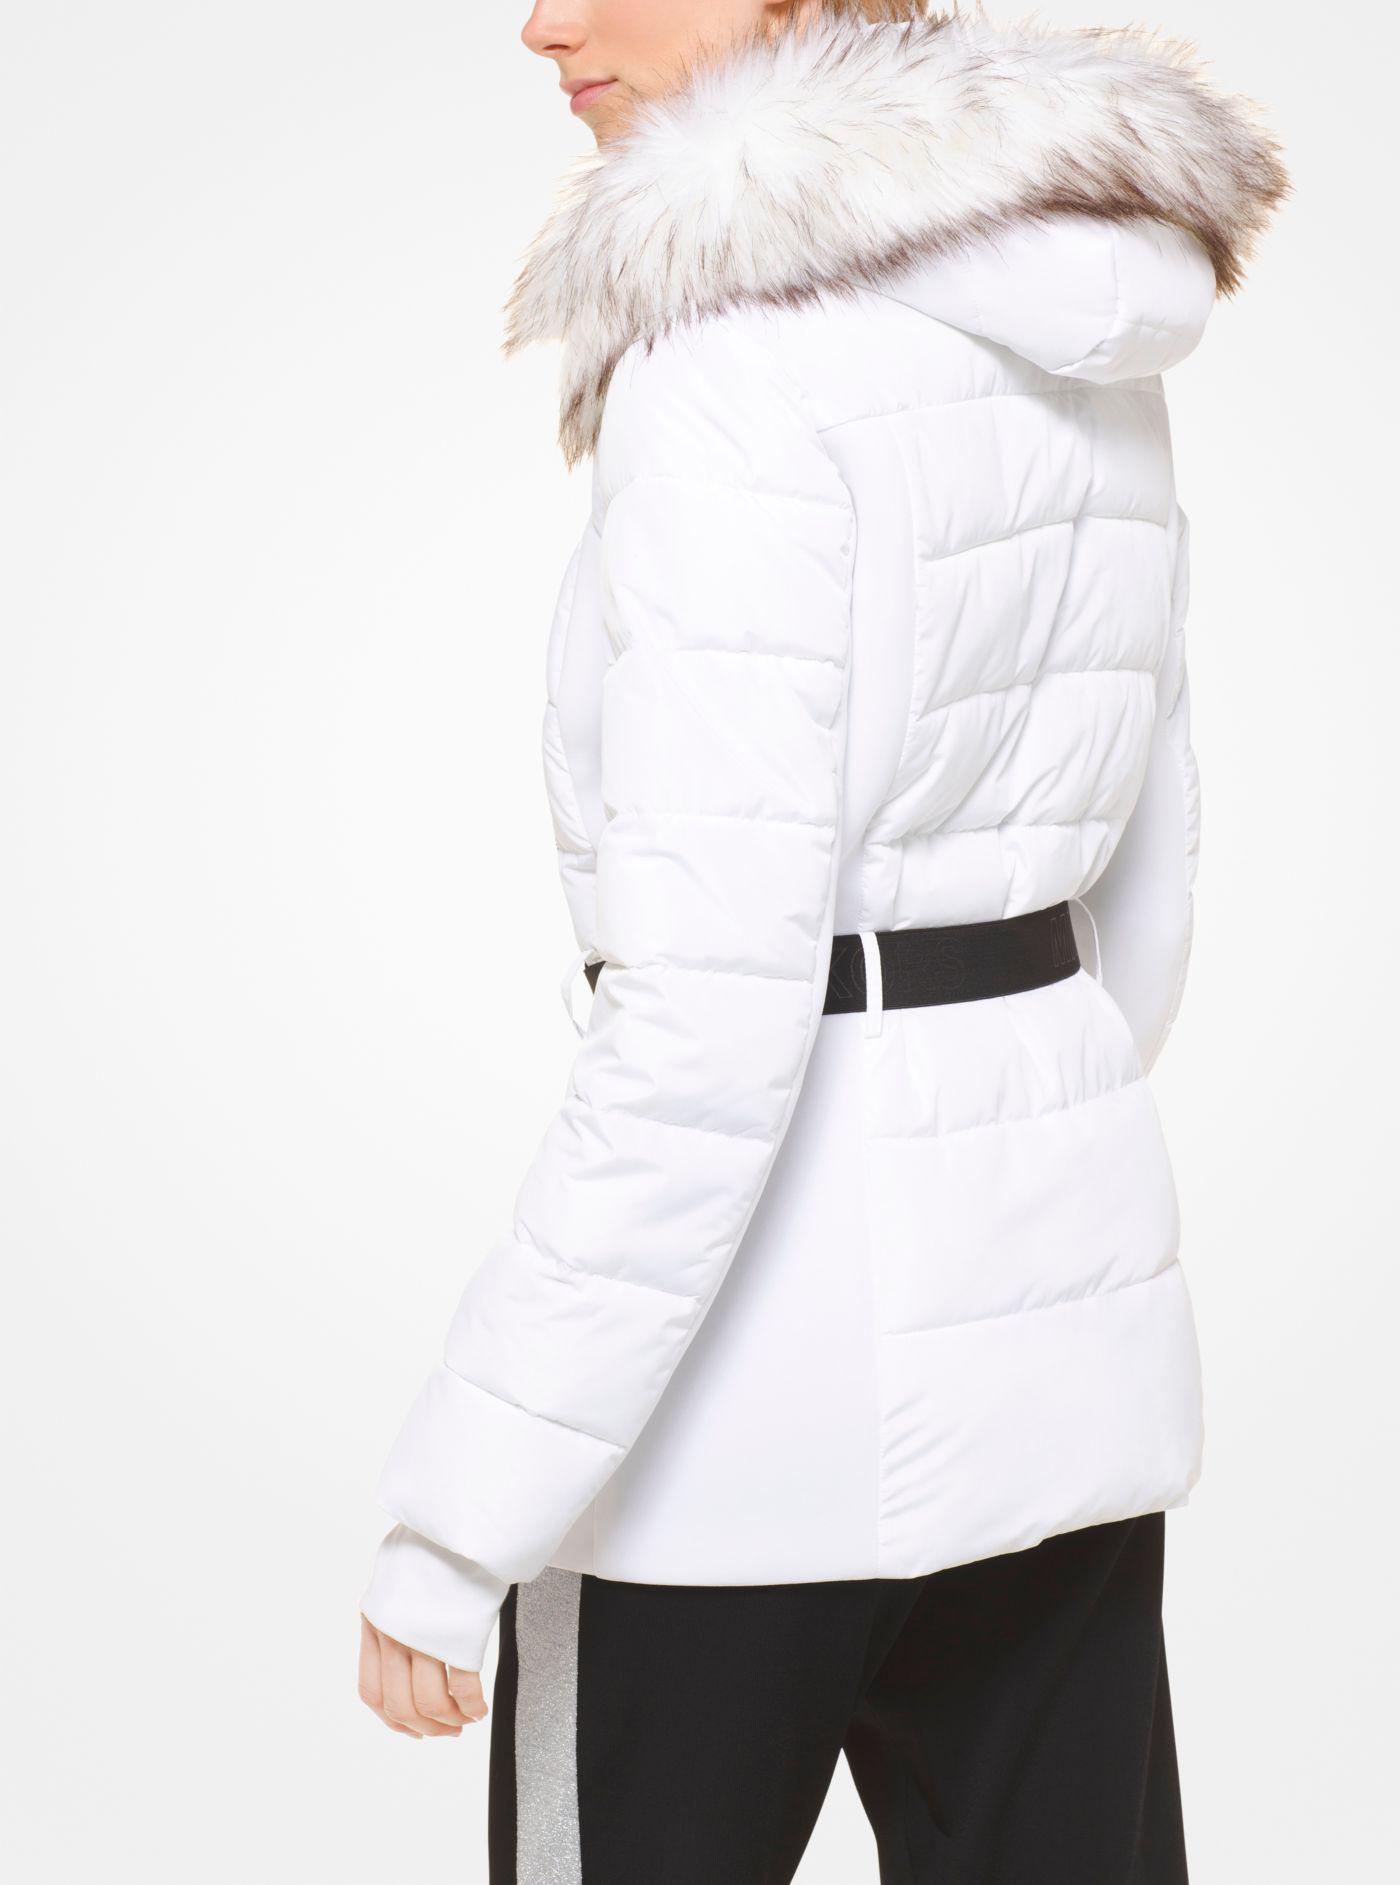 Michael Kors Faux Fur-trimmed Belted Puffer Jacket in White - Lyst